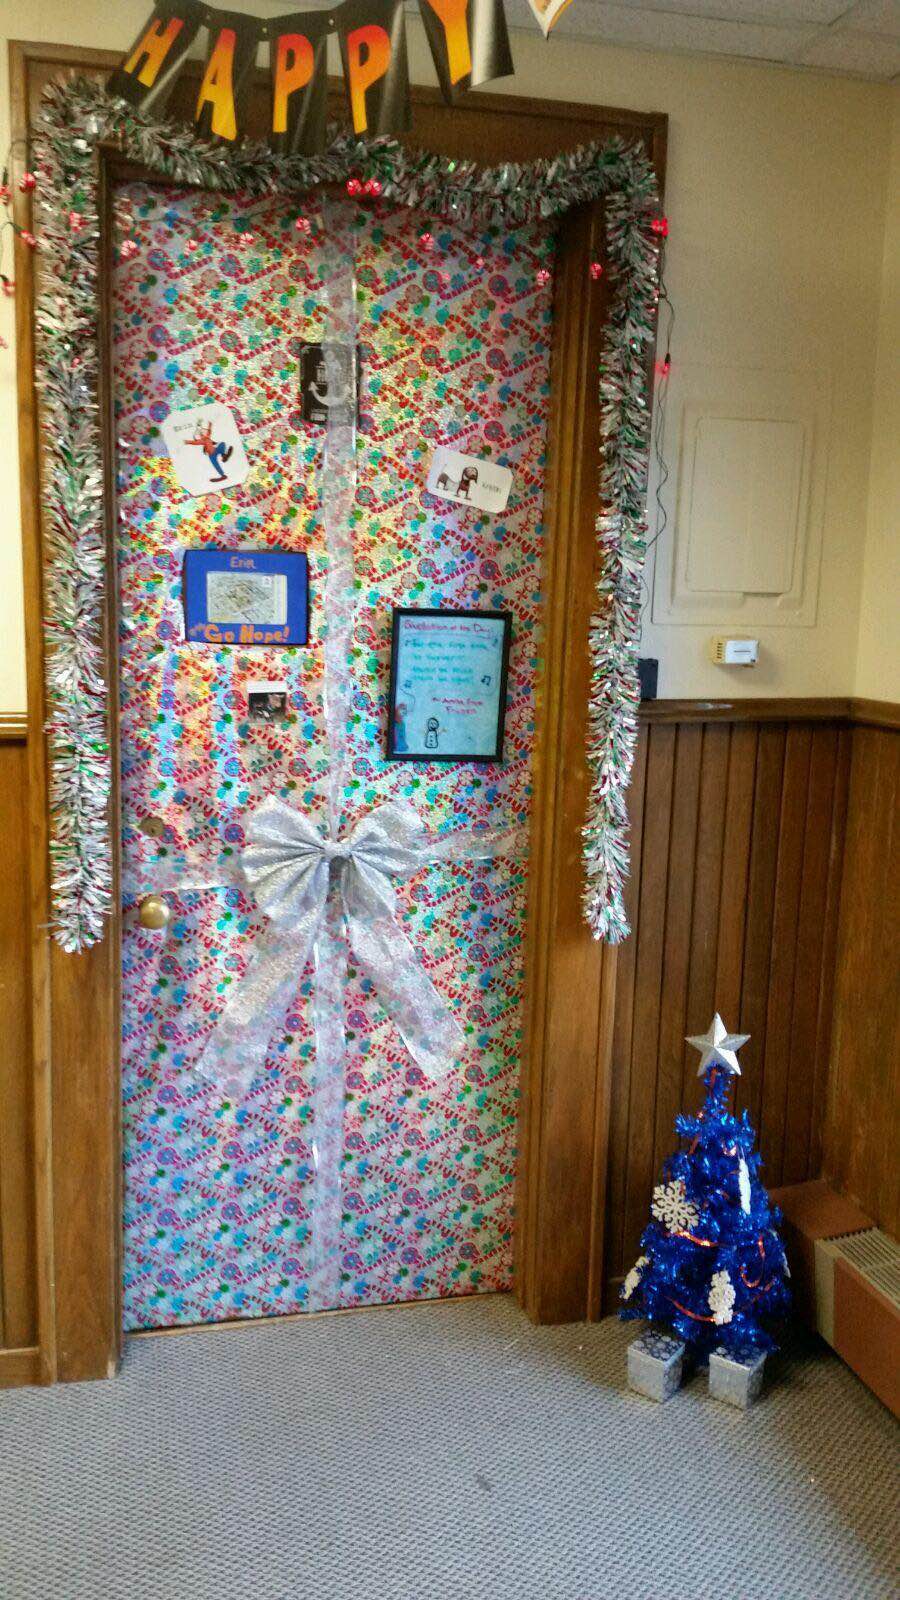 Our door decorated for Christmas (aka November 6th until December 12th when we had to leave for the semester break)